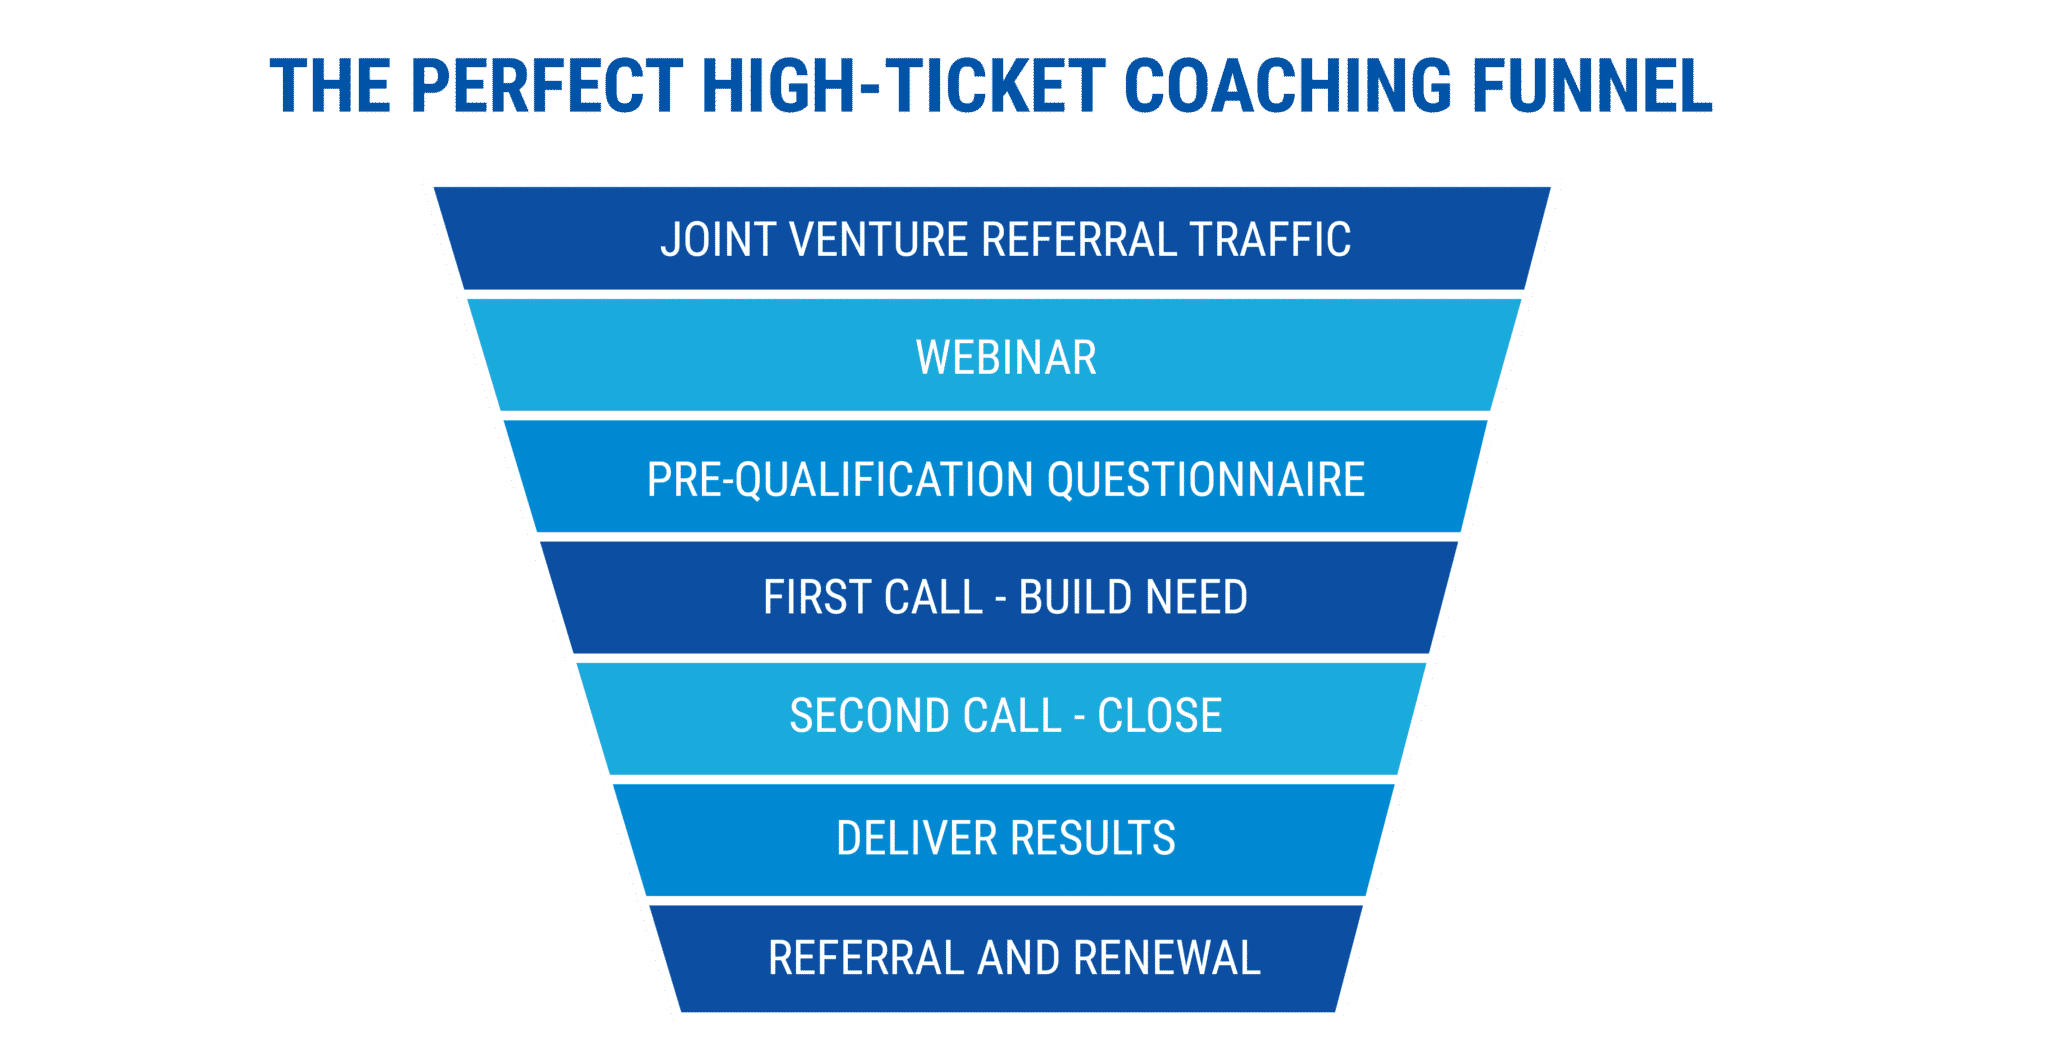 THE PERFECT HIGH - TICKET COACHING FUNNEL